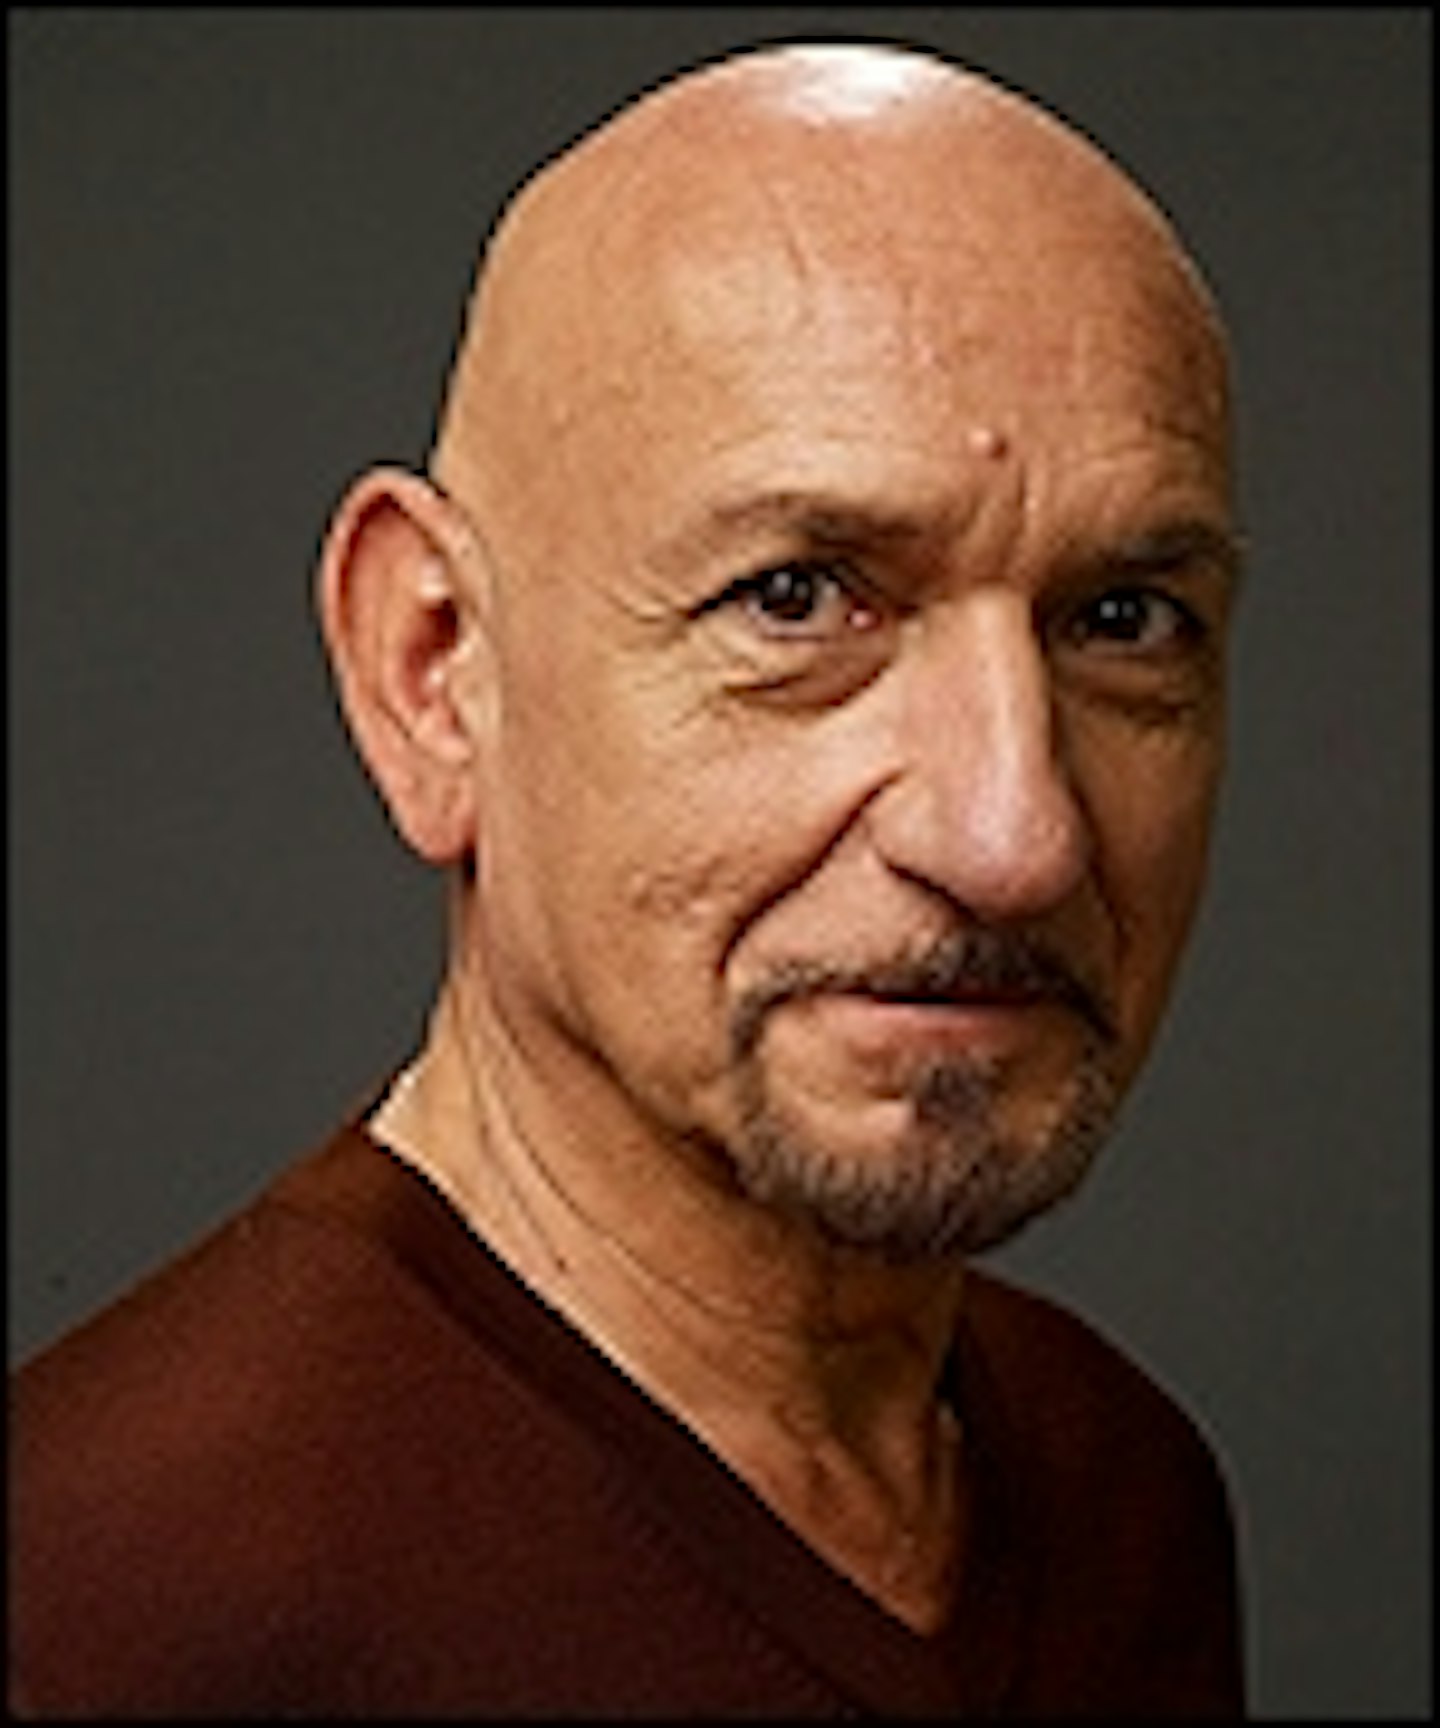 Ben Kingsley Drives On To Autobahn